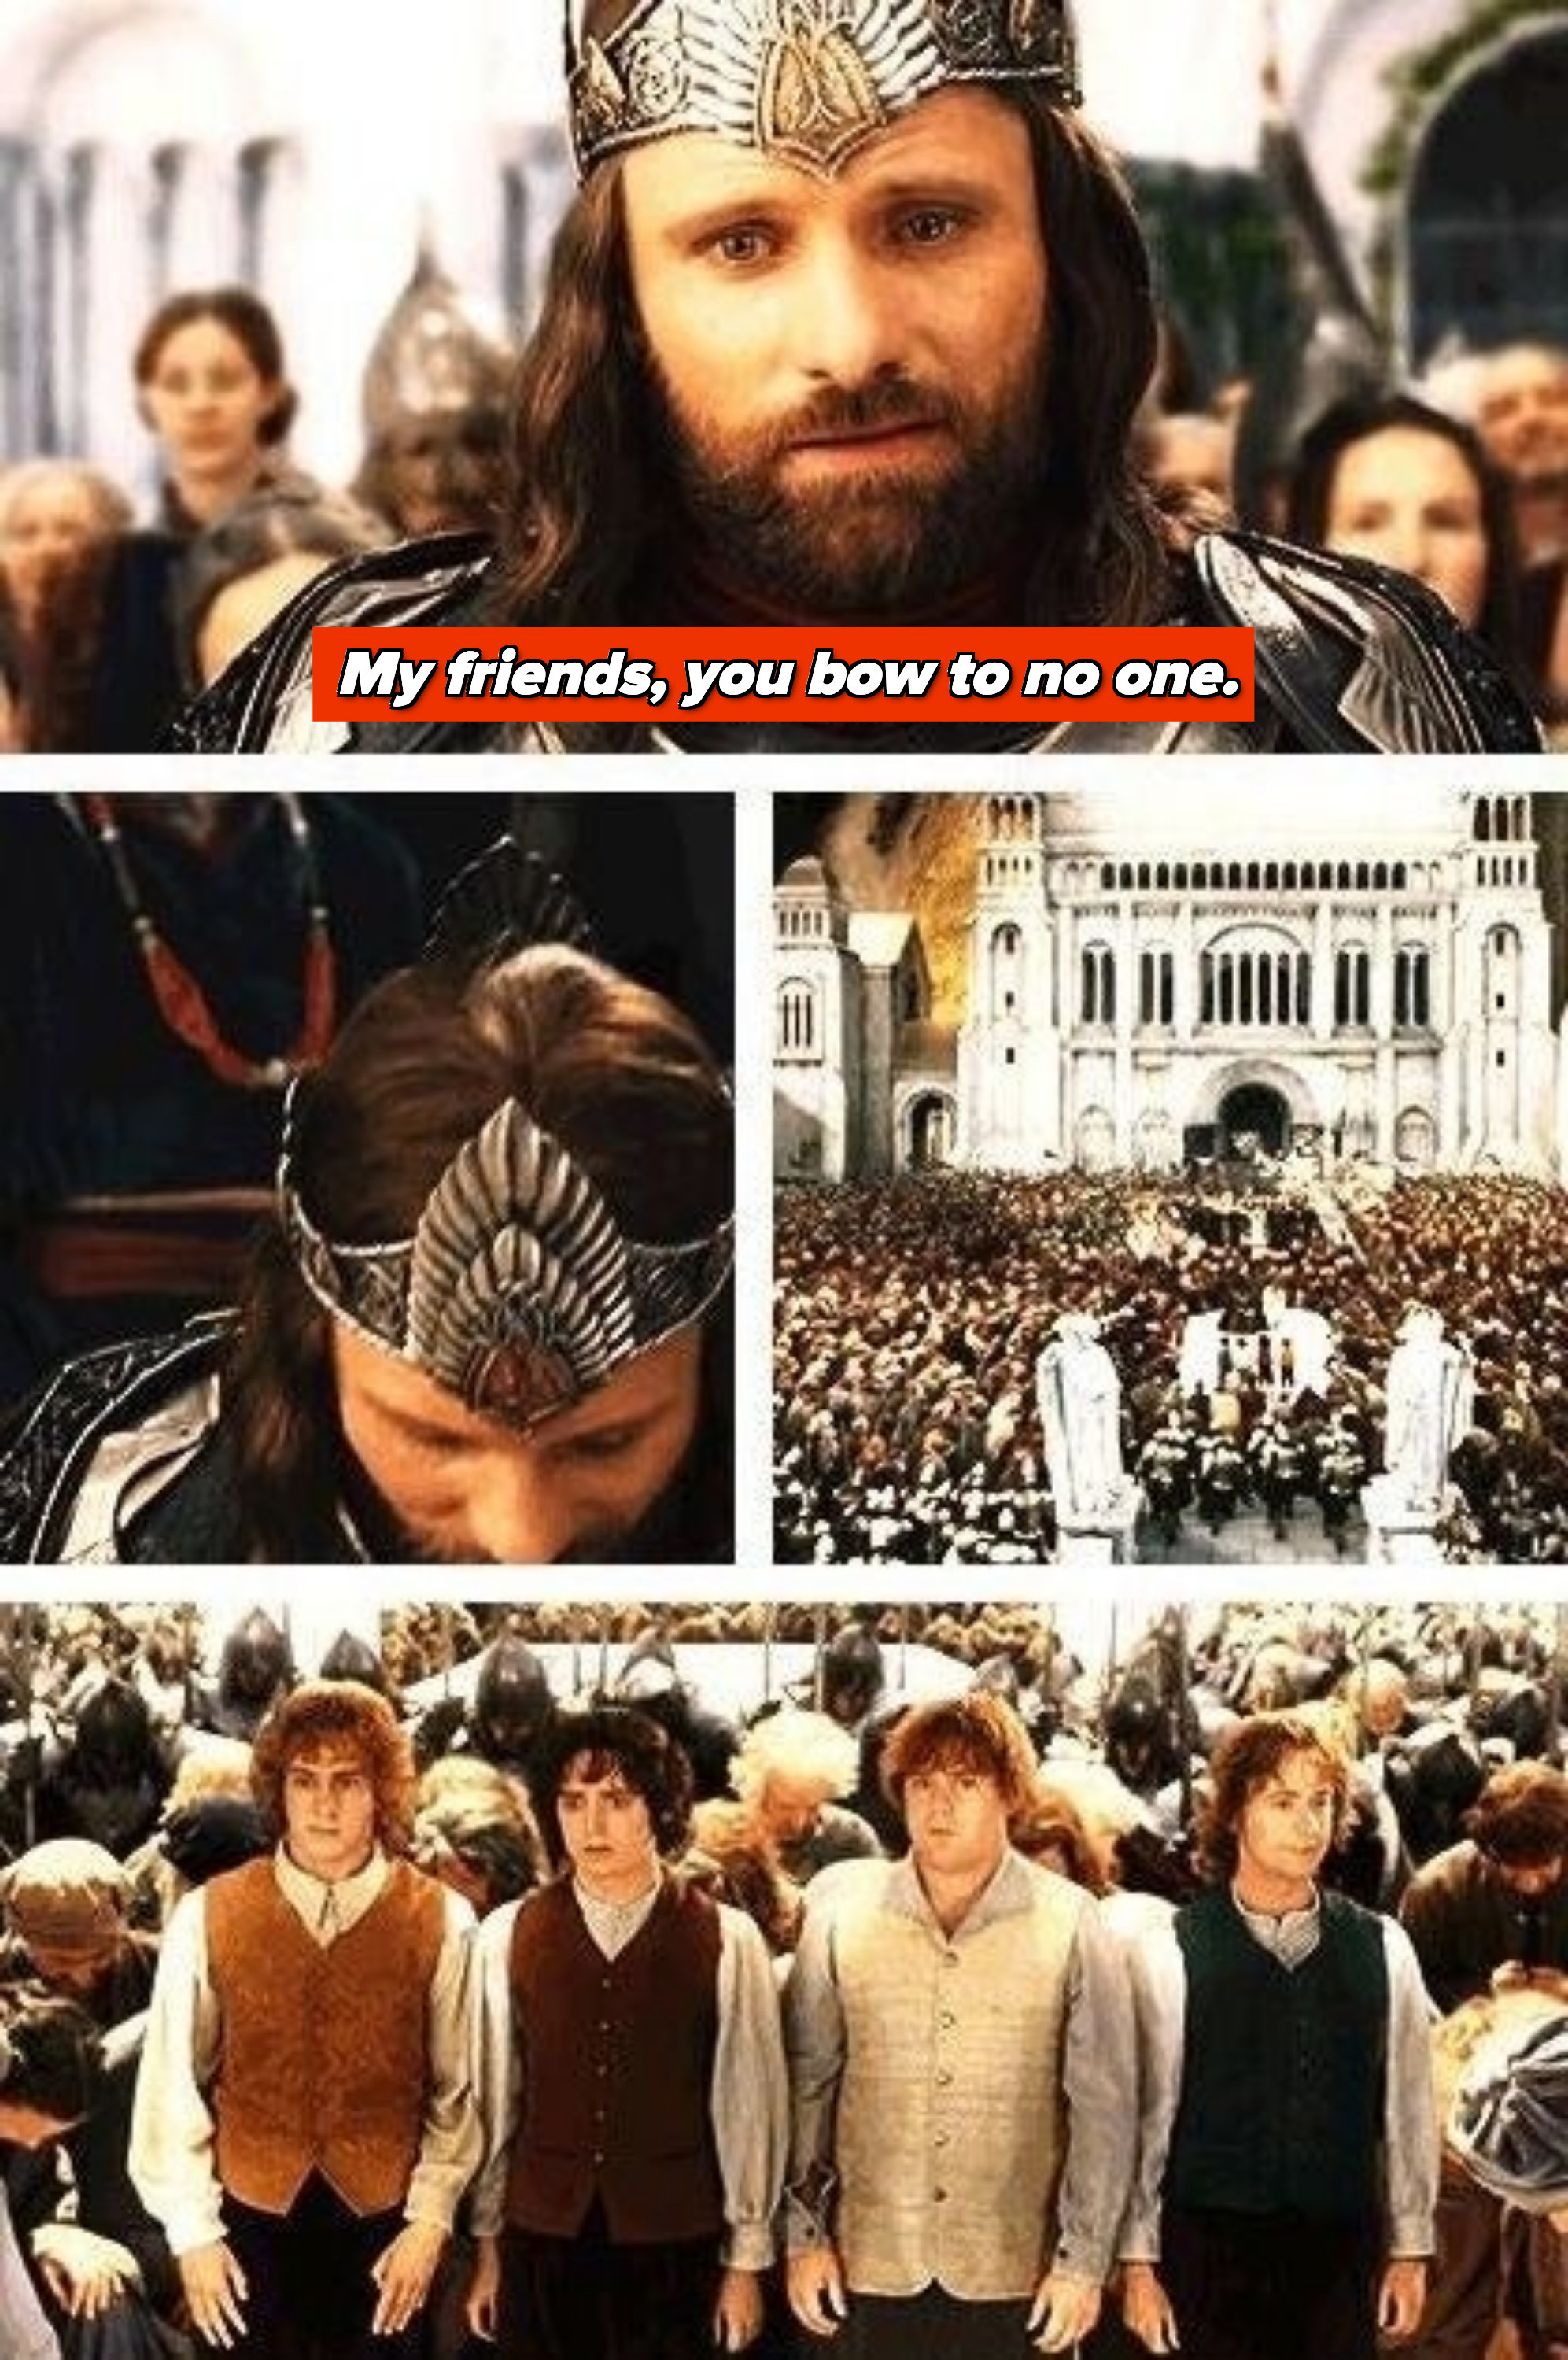 Aragorn: &quot;My friends, you bow to no one&quot;